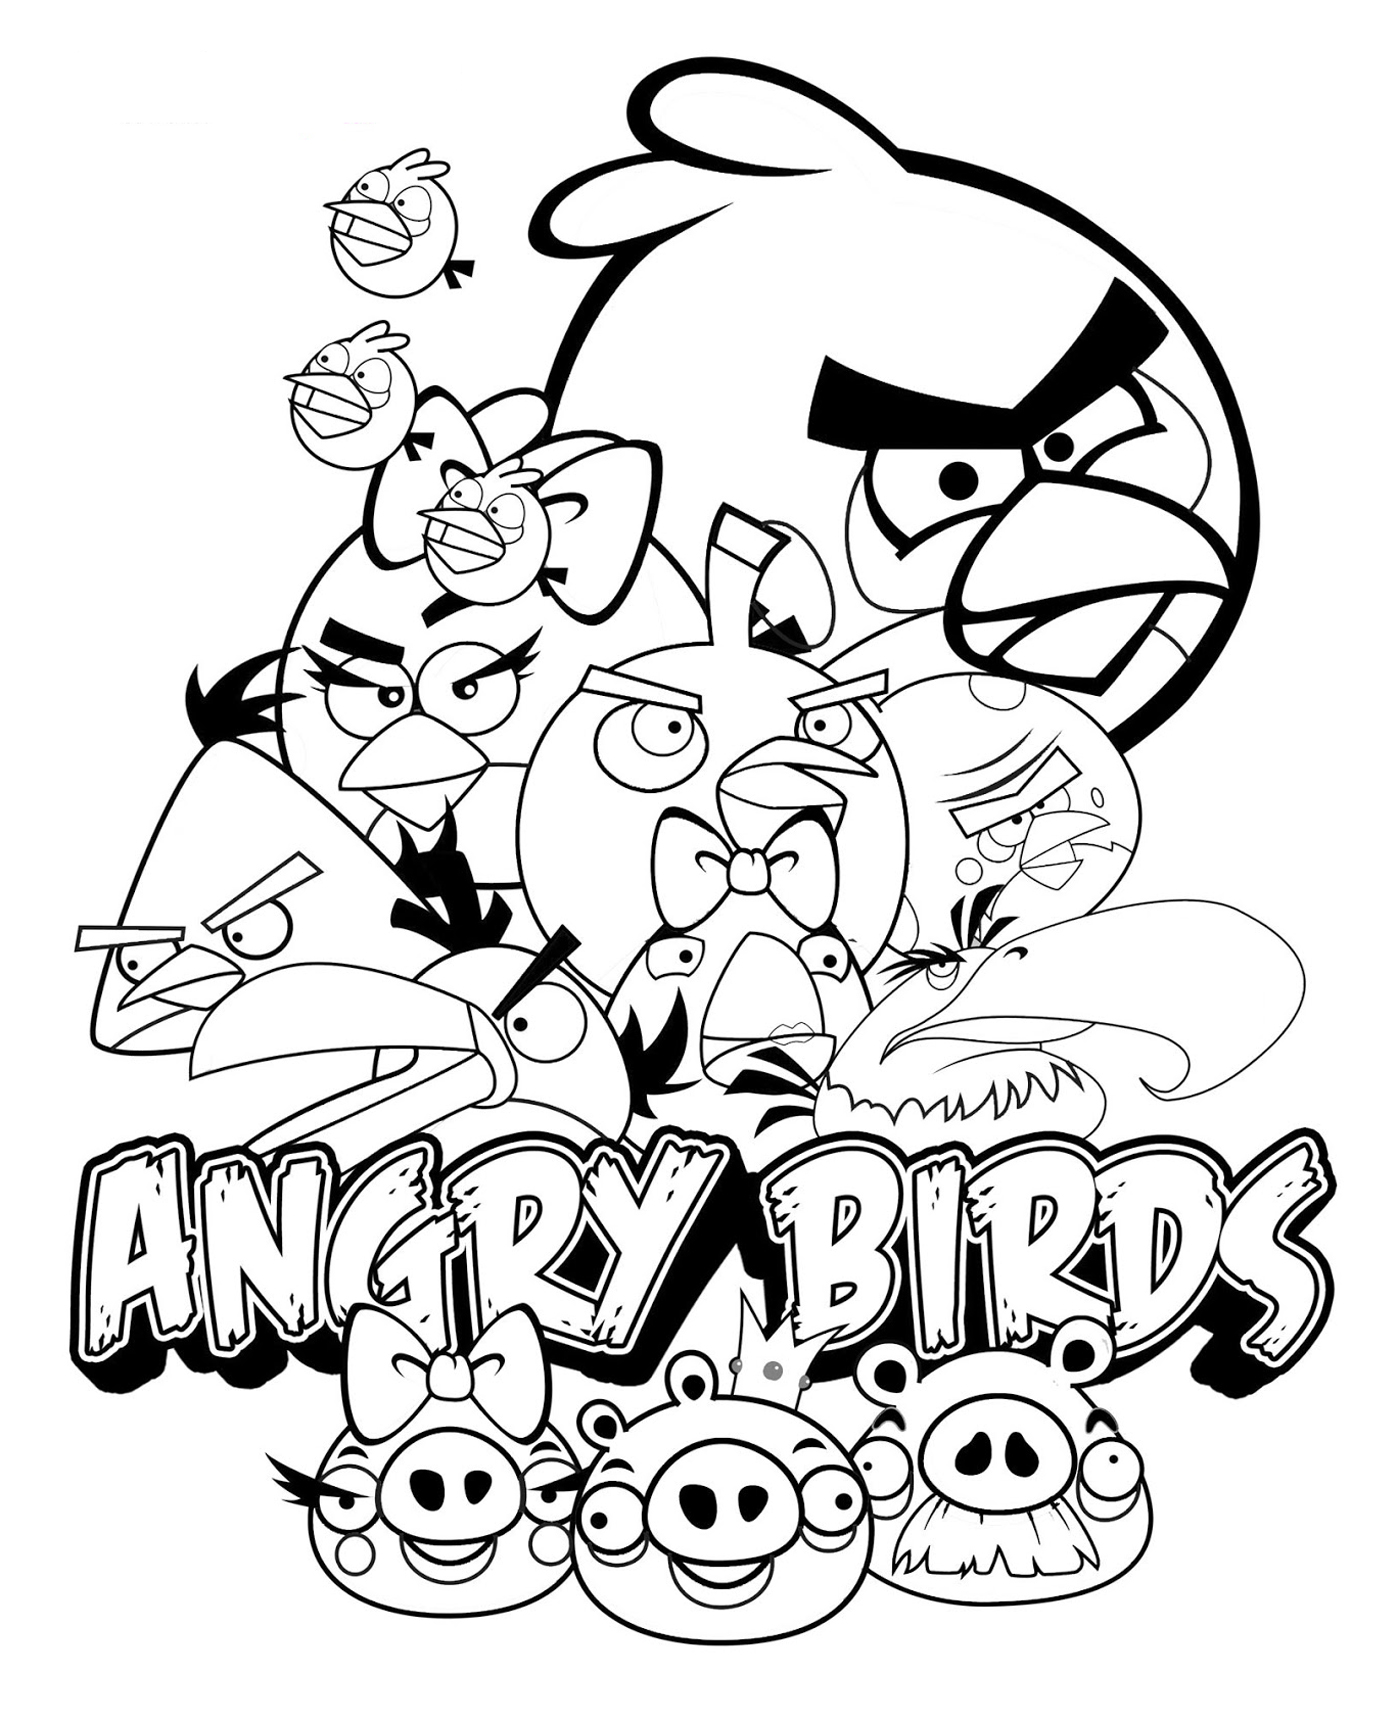 Angry birds 11